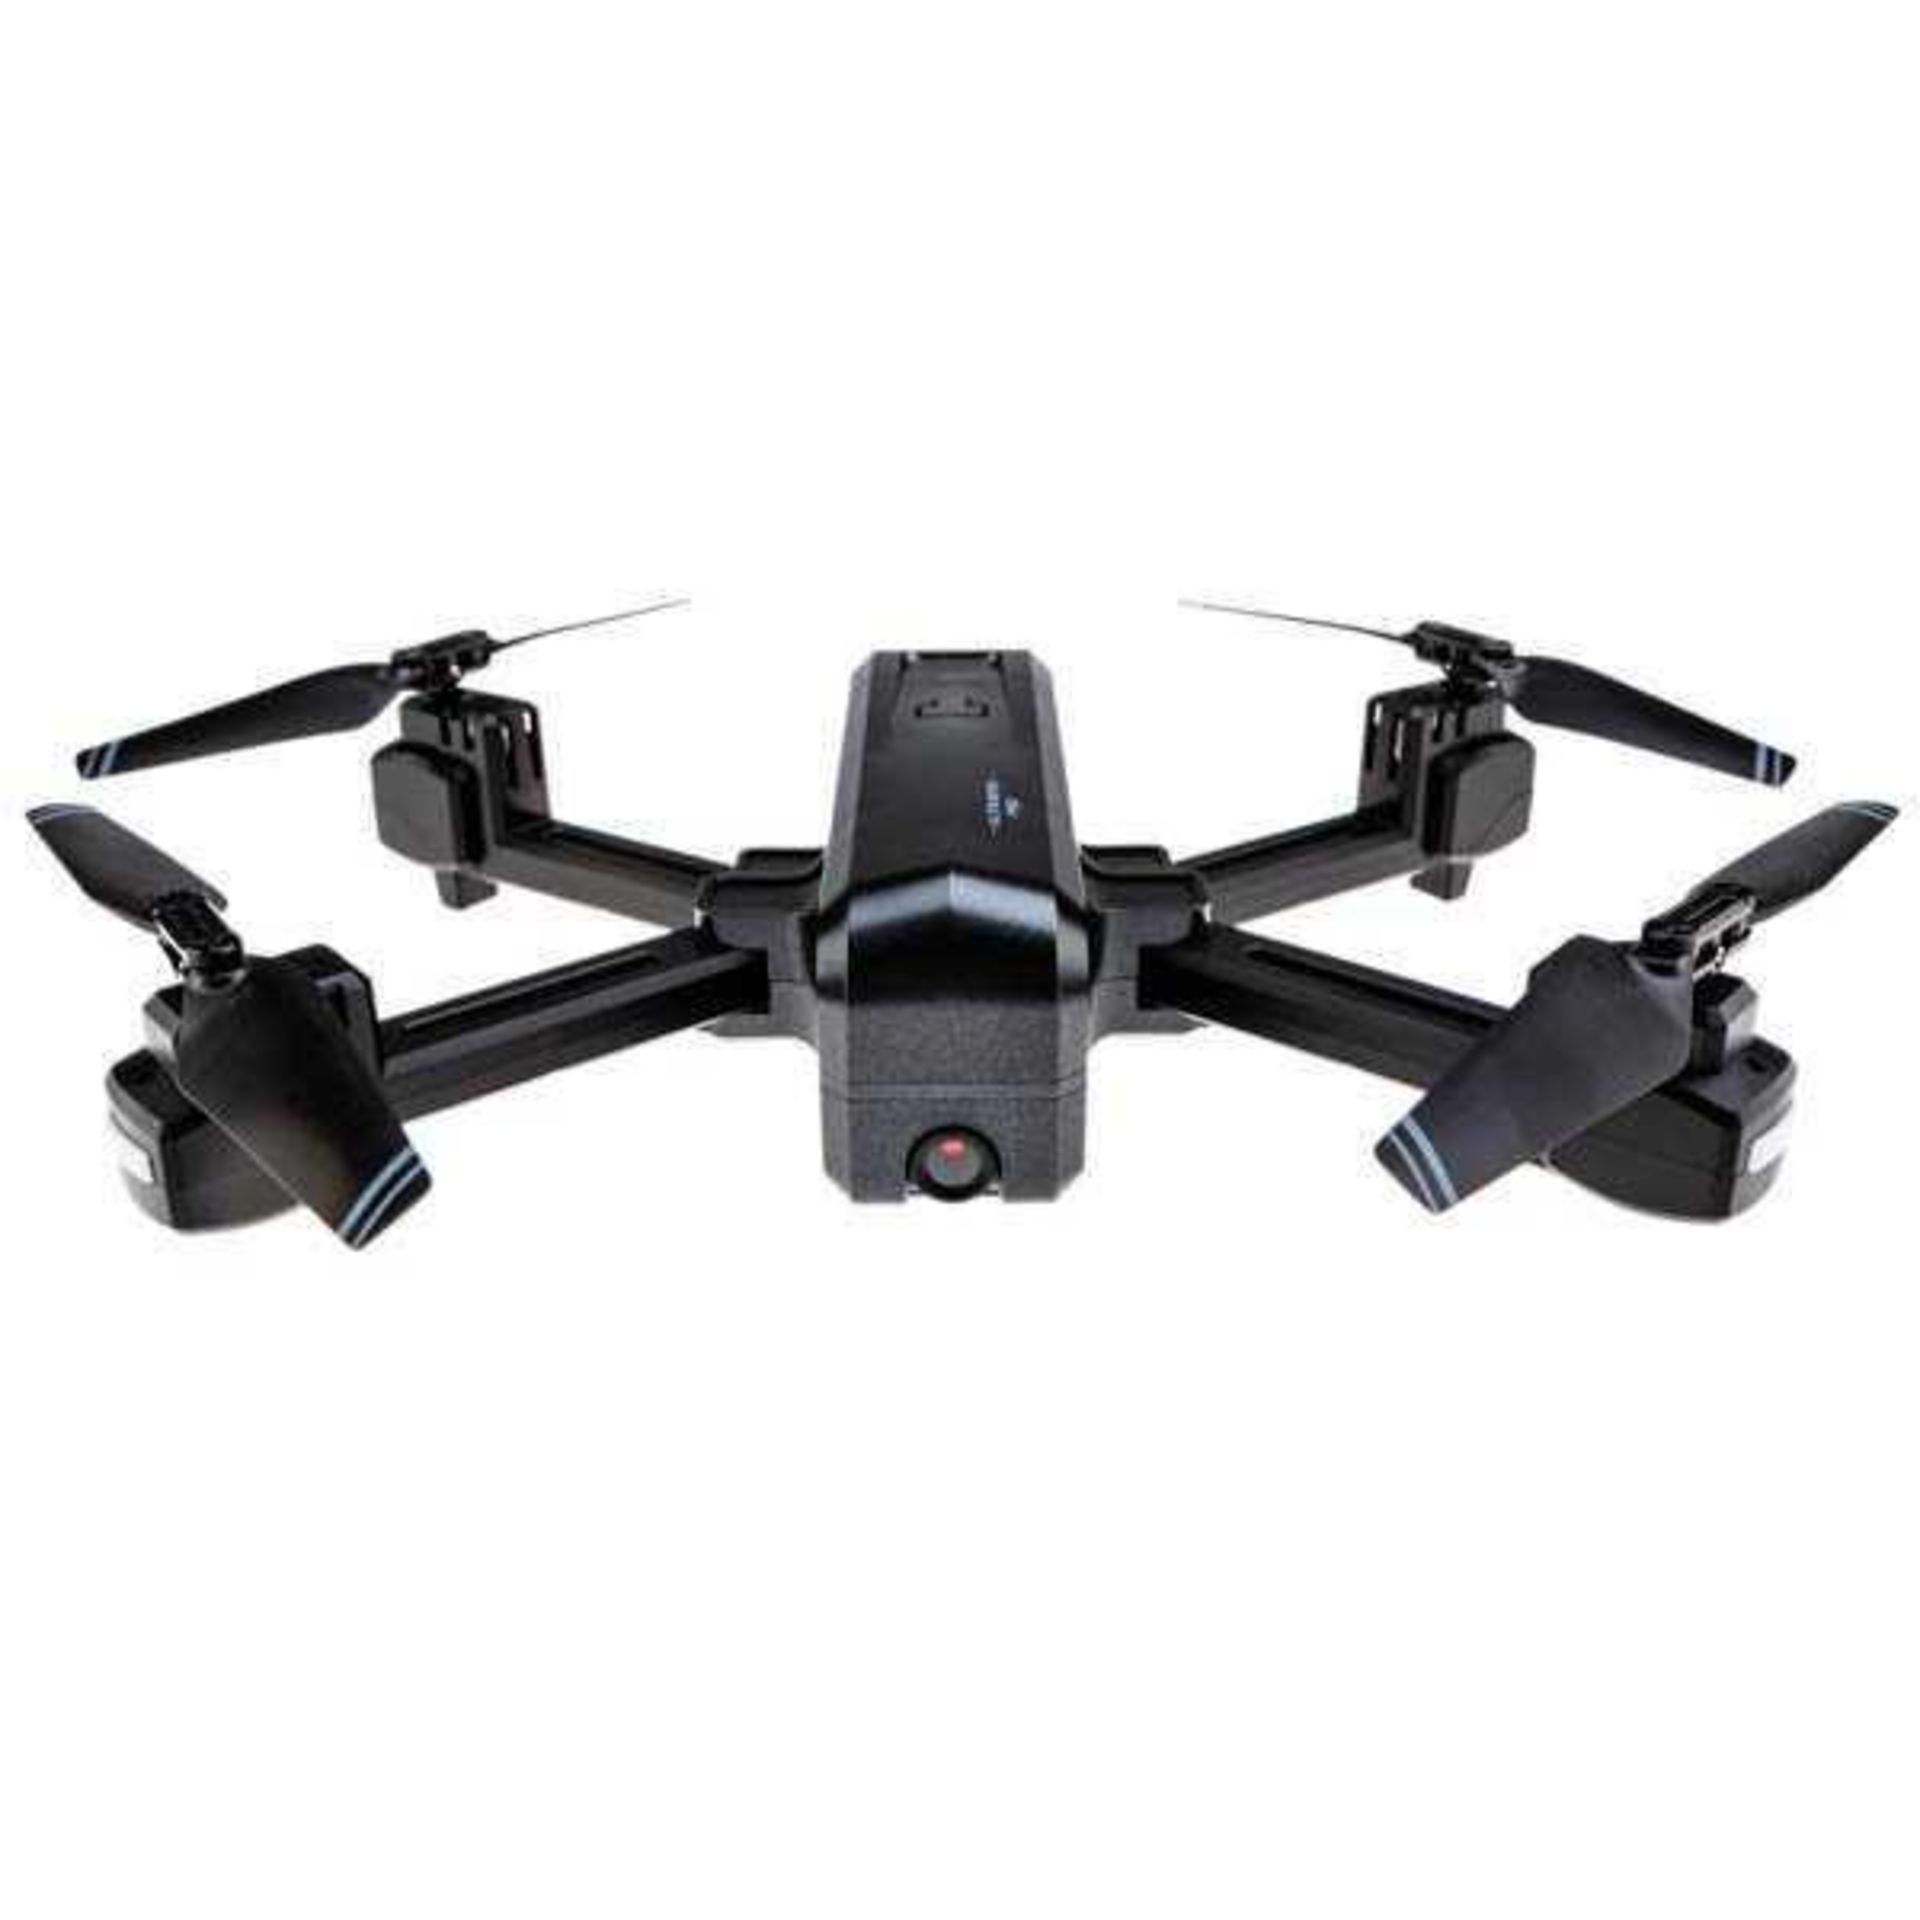 Rrp £150 Each Boxed Ideal World Ultimate Pro High Performance Rc-Hd Pro Folding Drone